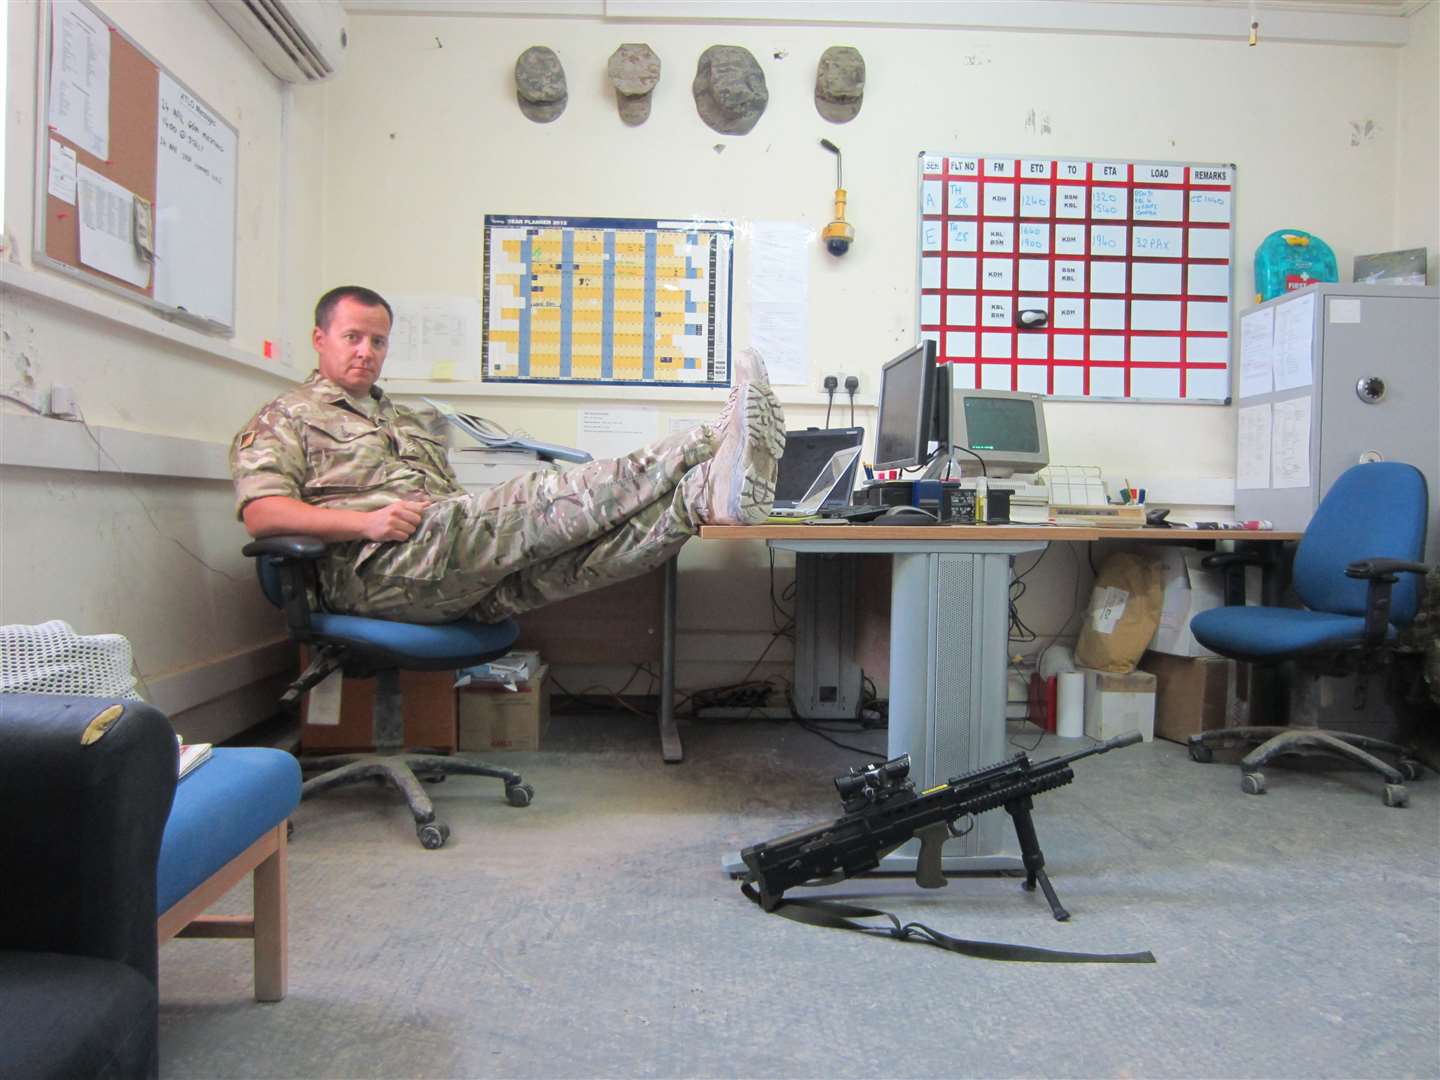 James Lee working hard for Queen and Country in Afghanistan